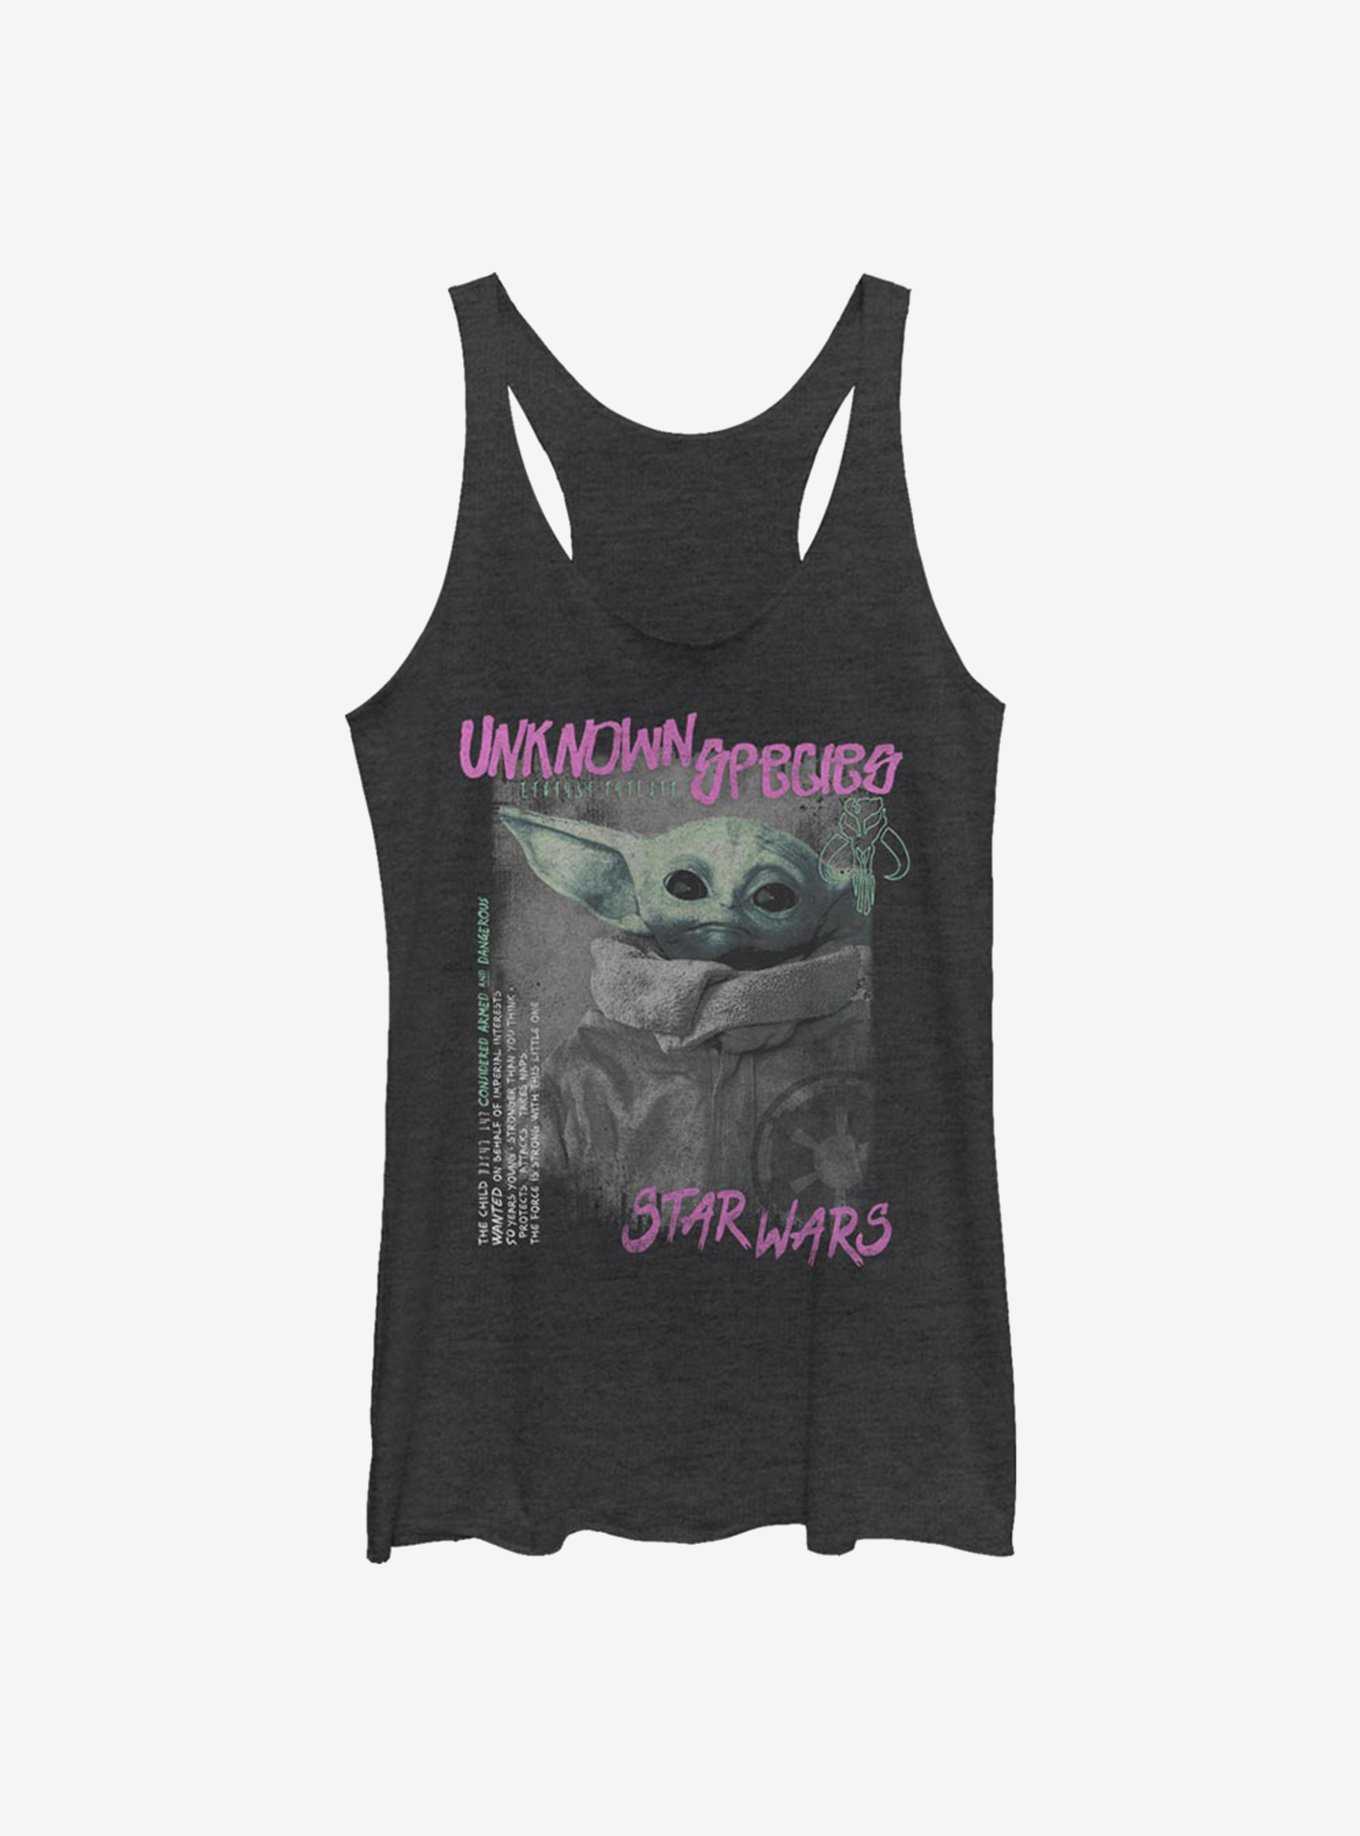 Star Wars The Mandalorian The Child Unknown Species Womens Tank Top, , hi-res